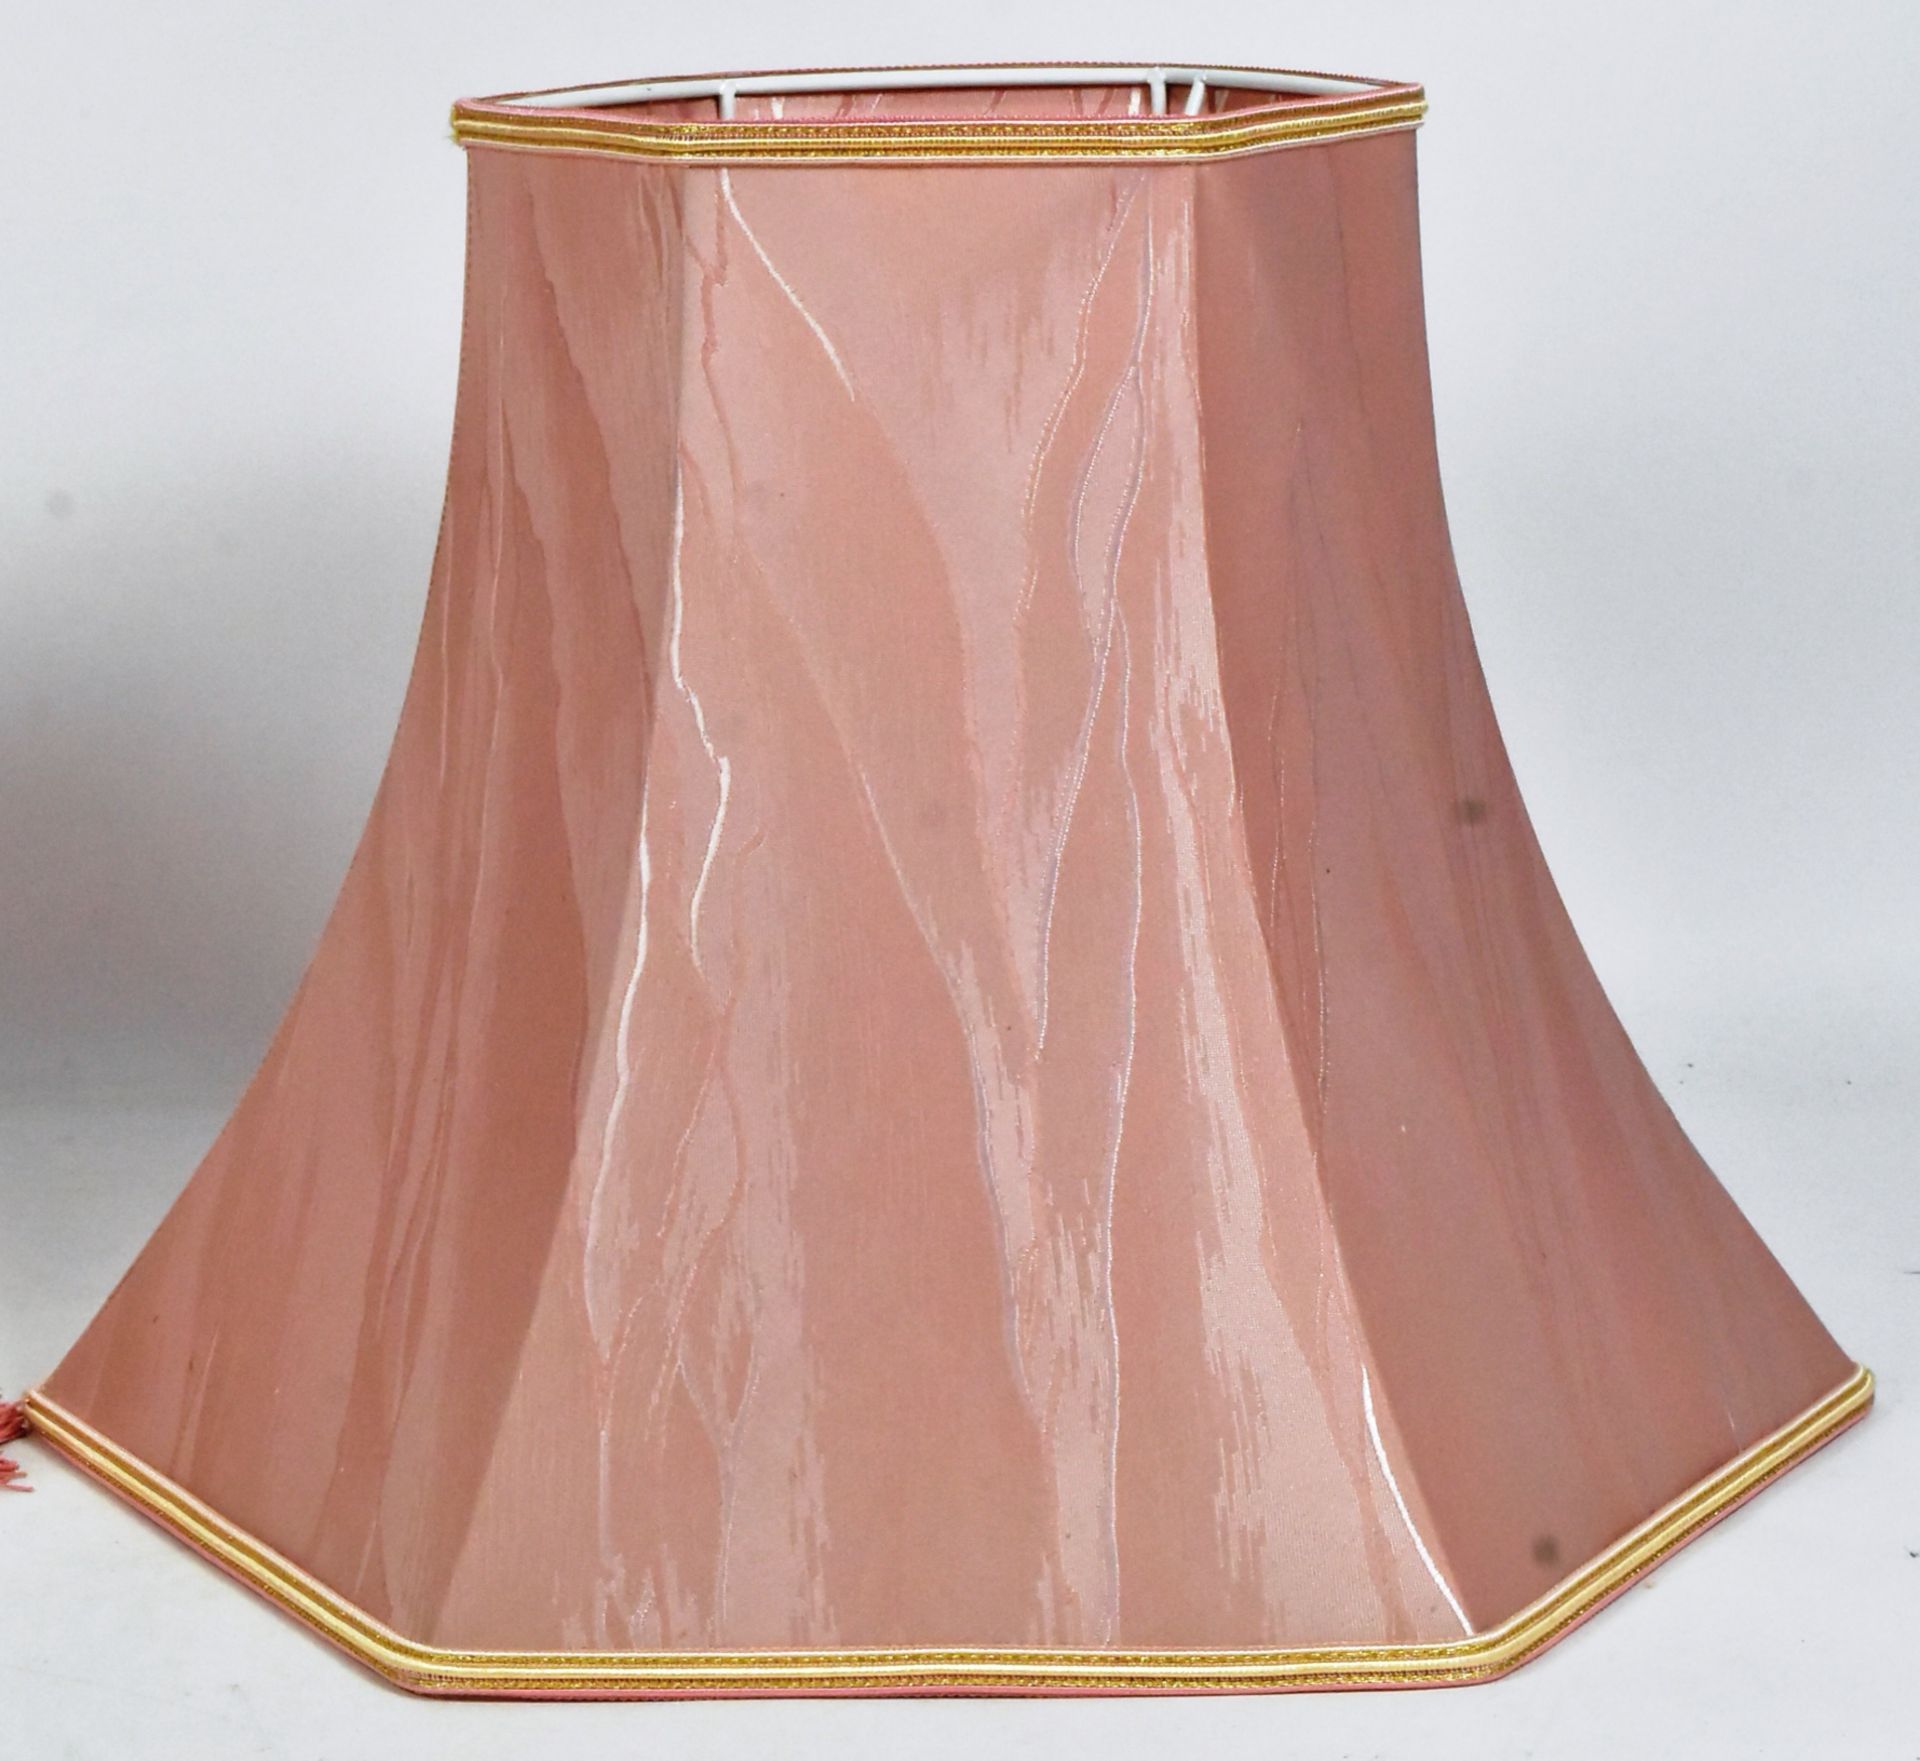 TWO LARGE VINTAGE PINK LAMP SHADES - Image 2 of 6